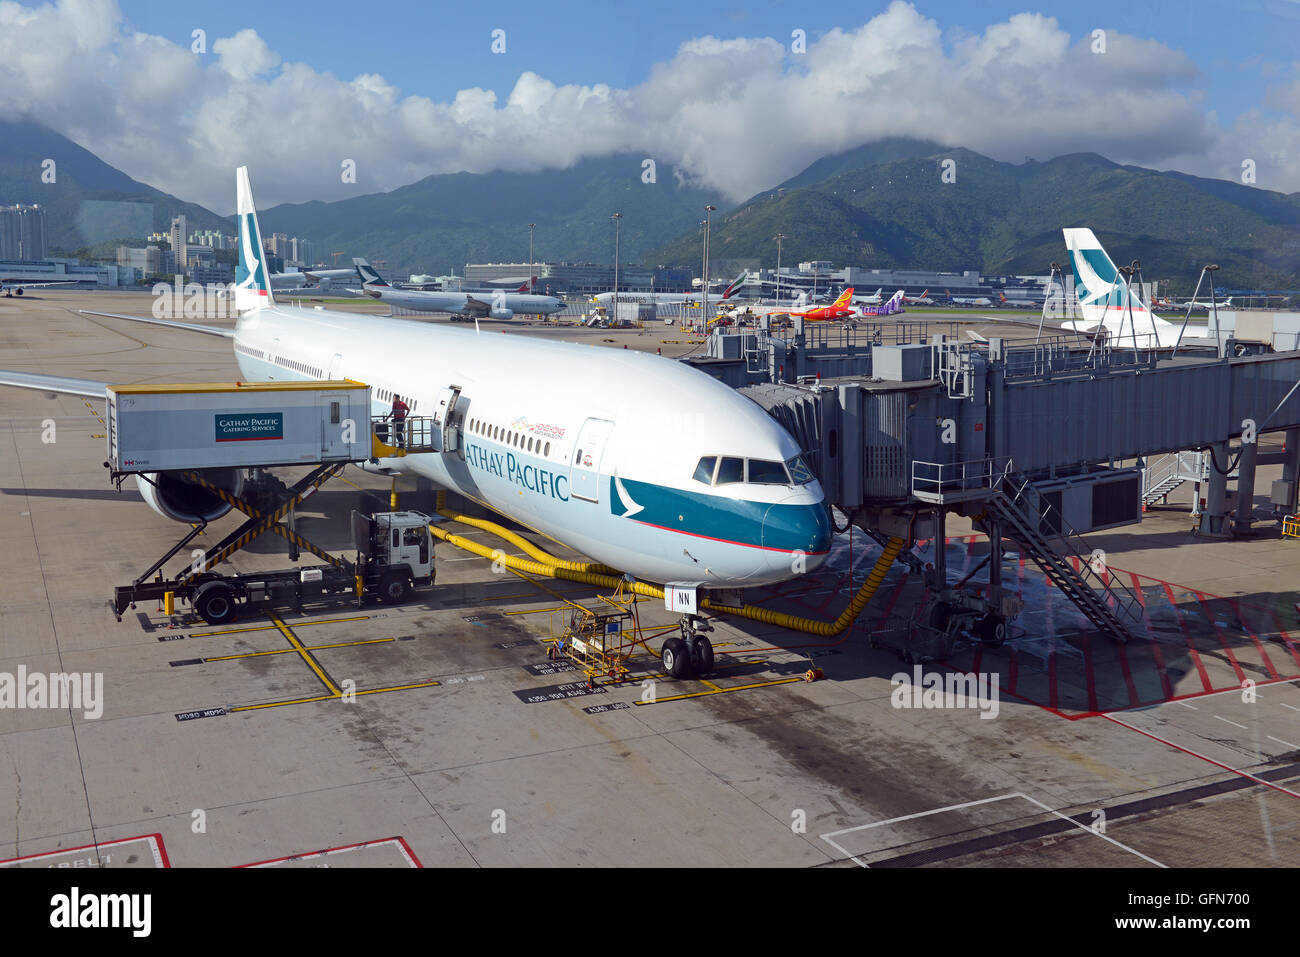 Cathay Pacific jet airplane at Hong Kong International airport, which